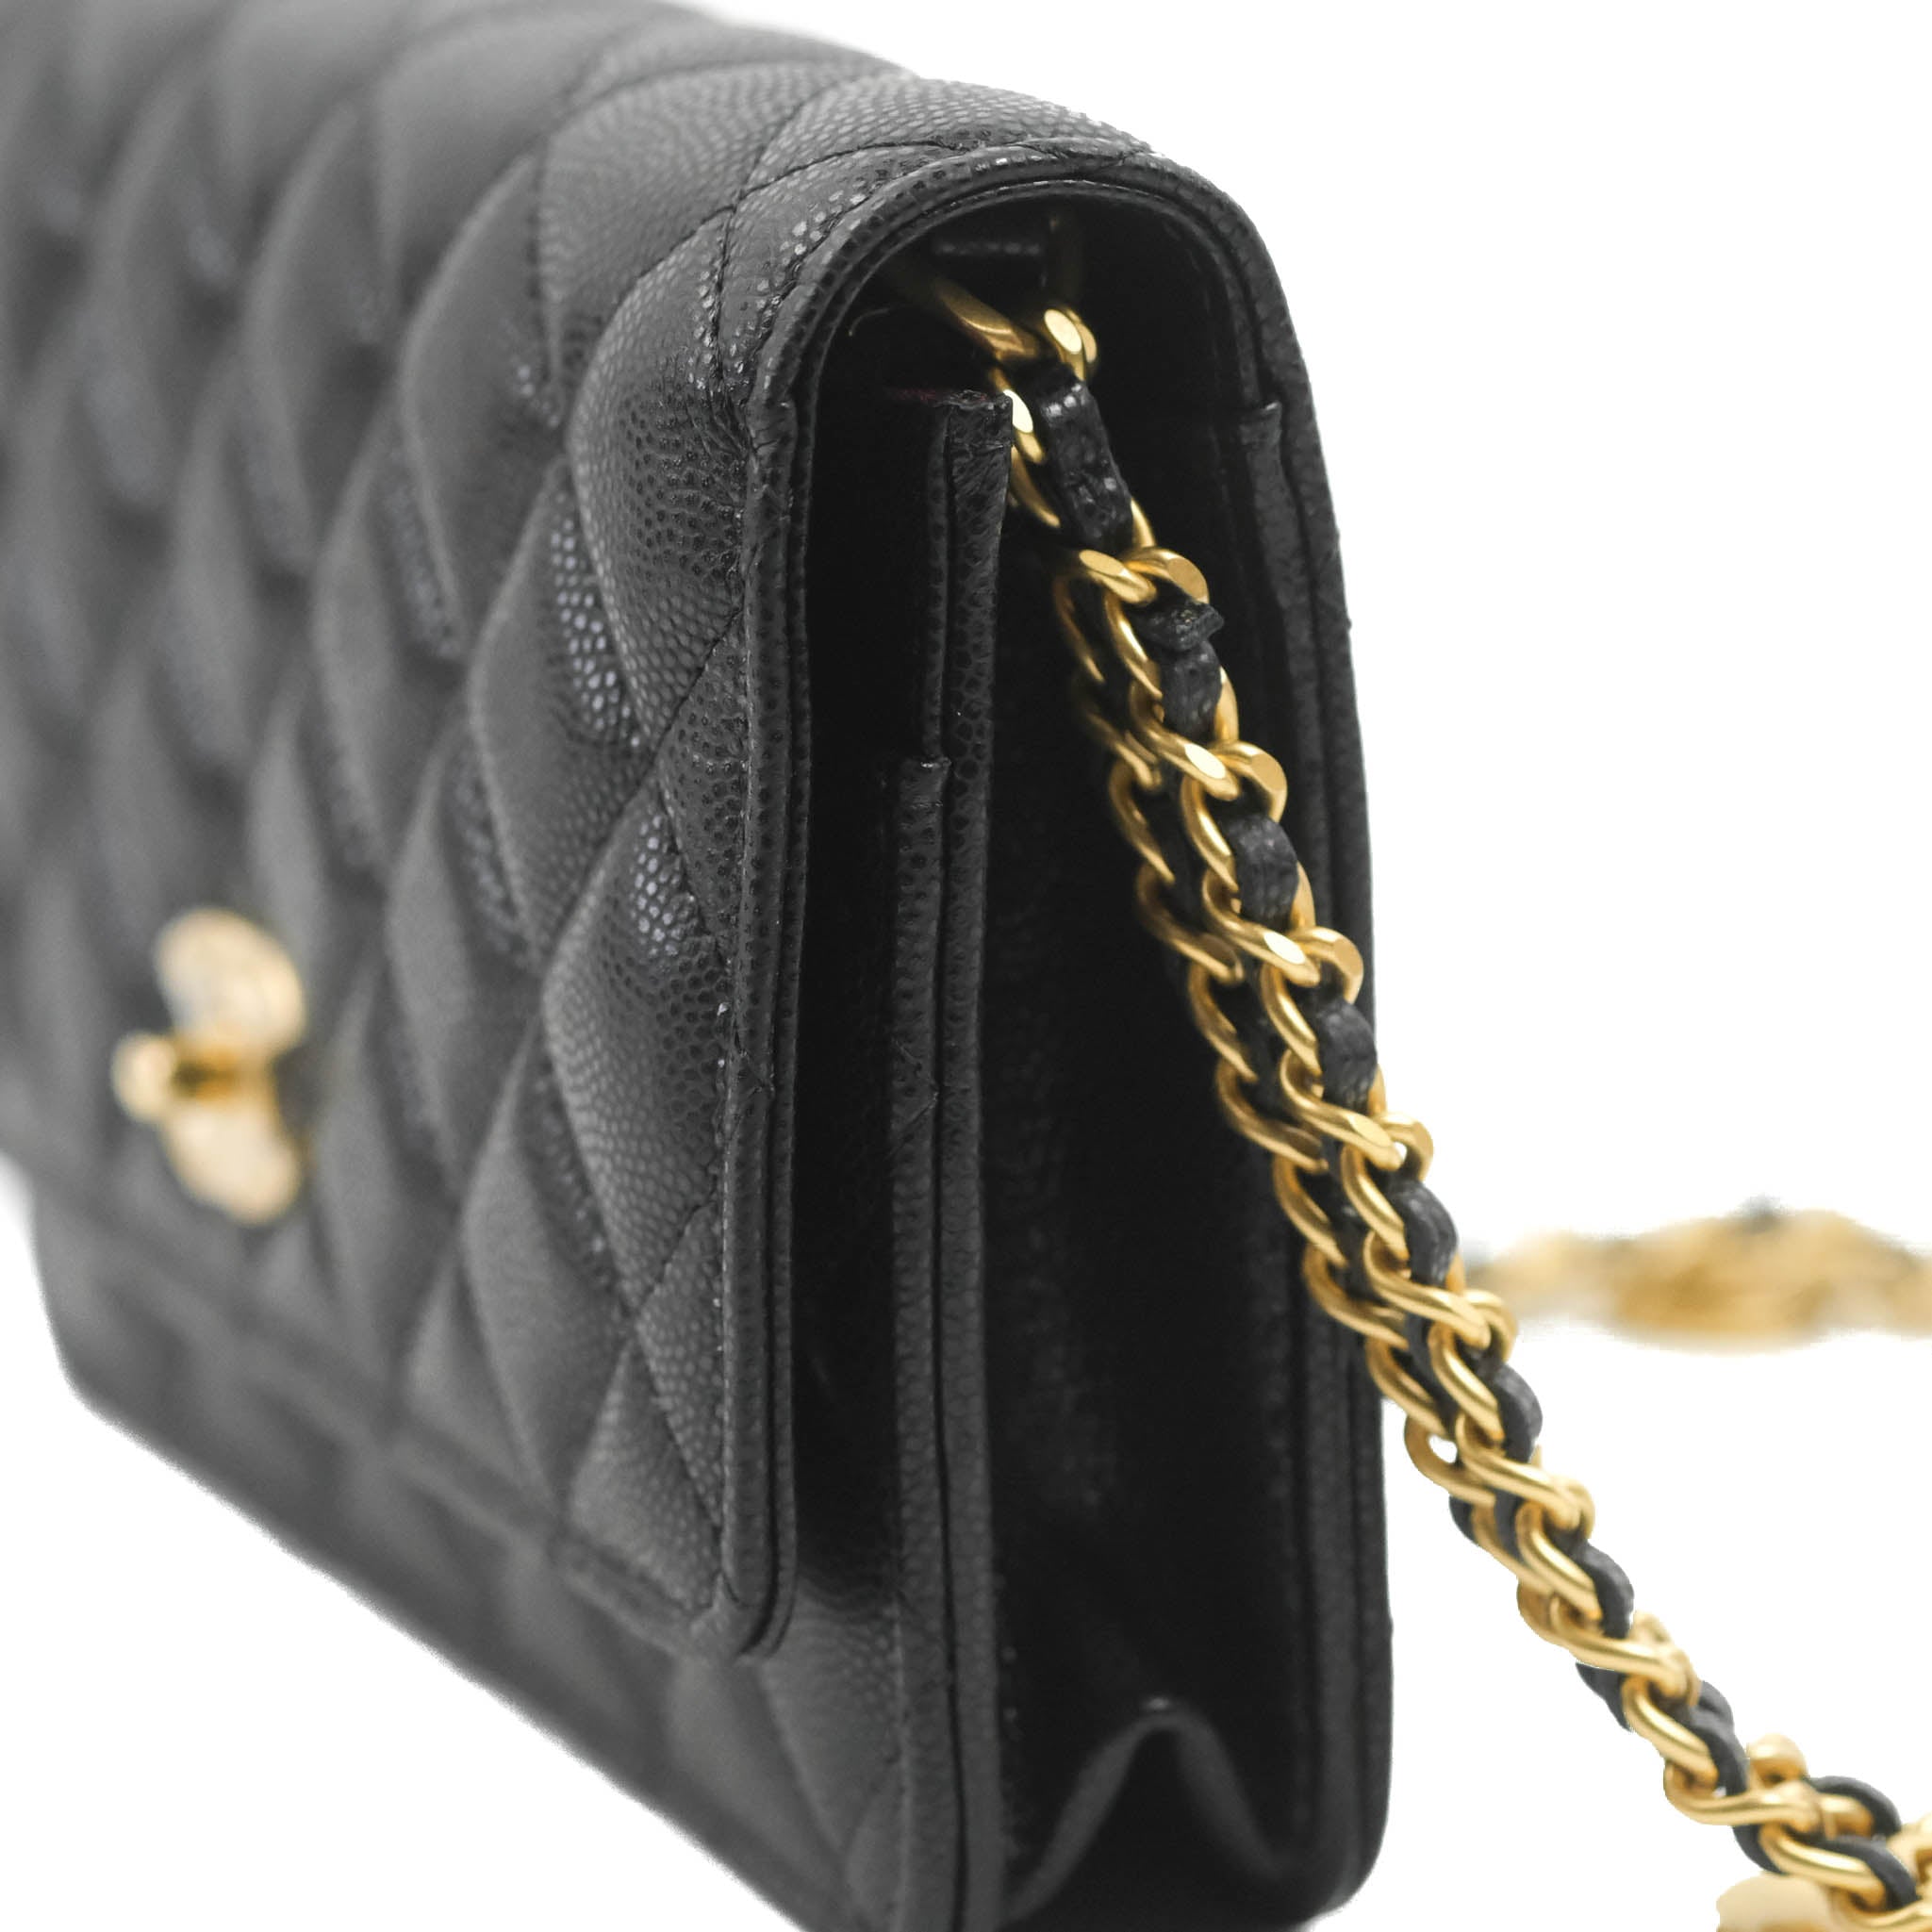 Chanel Turnlock Bow Wallet on Chain, Black Caviar with Gold Hardware, New  in Box WA001